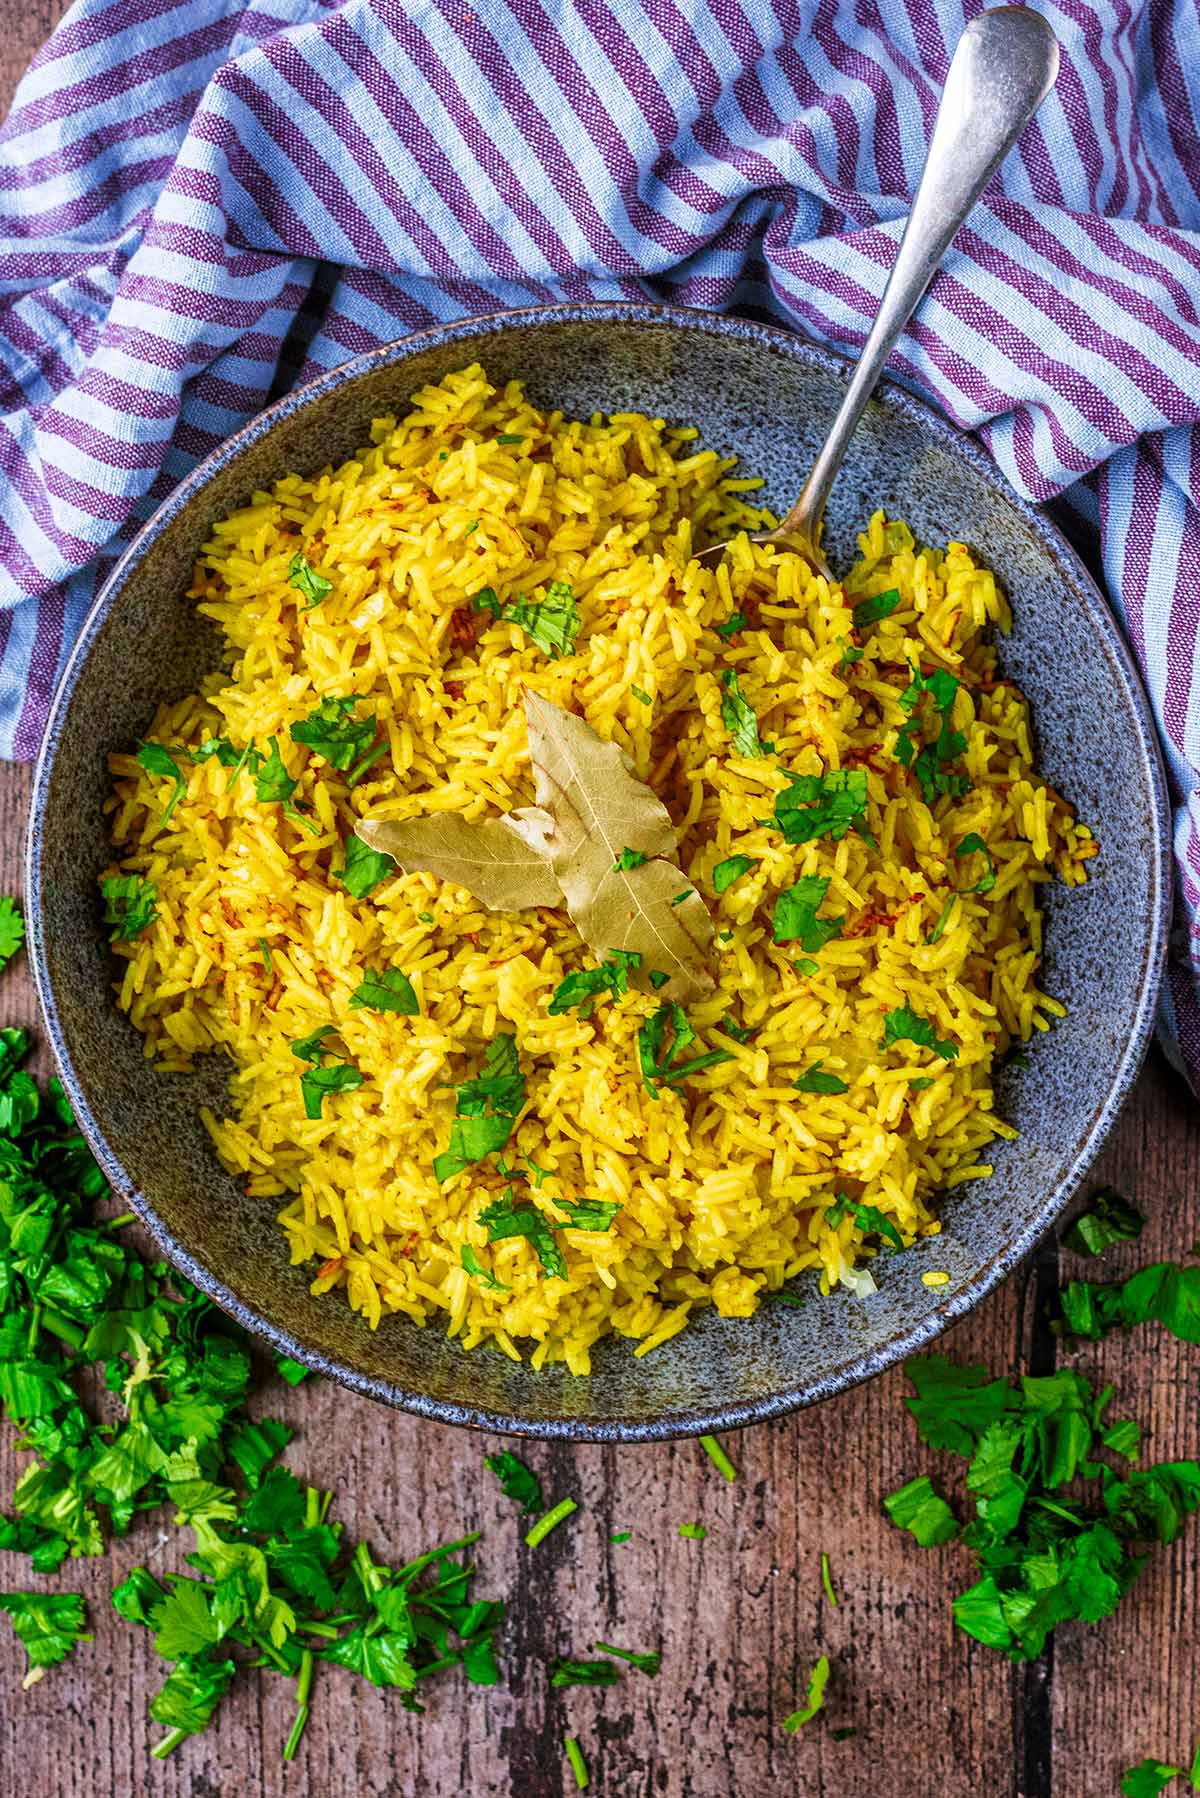 A bowl of yellow coloured rice next to a striped towel and chopped coriander.